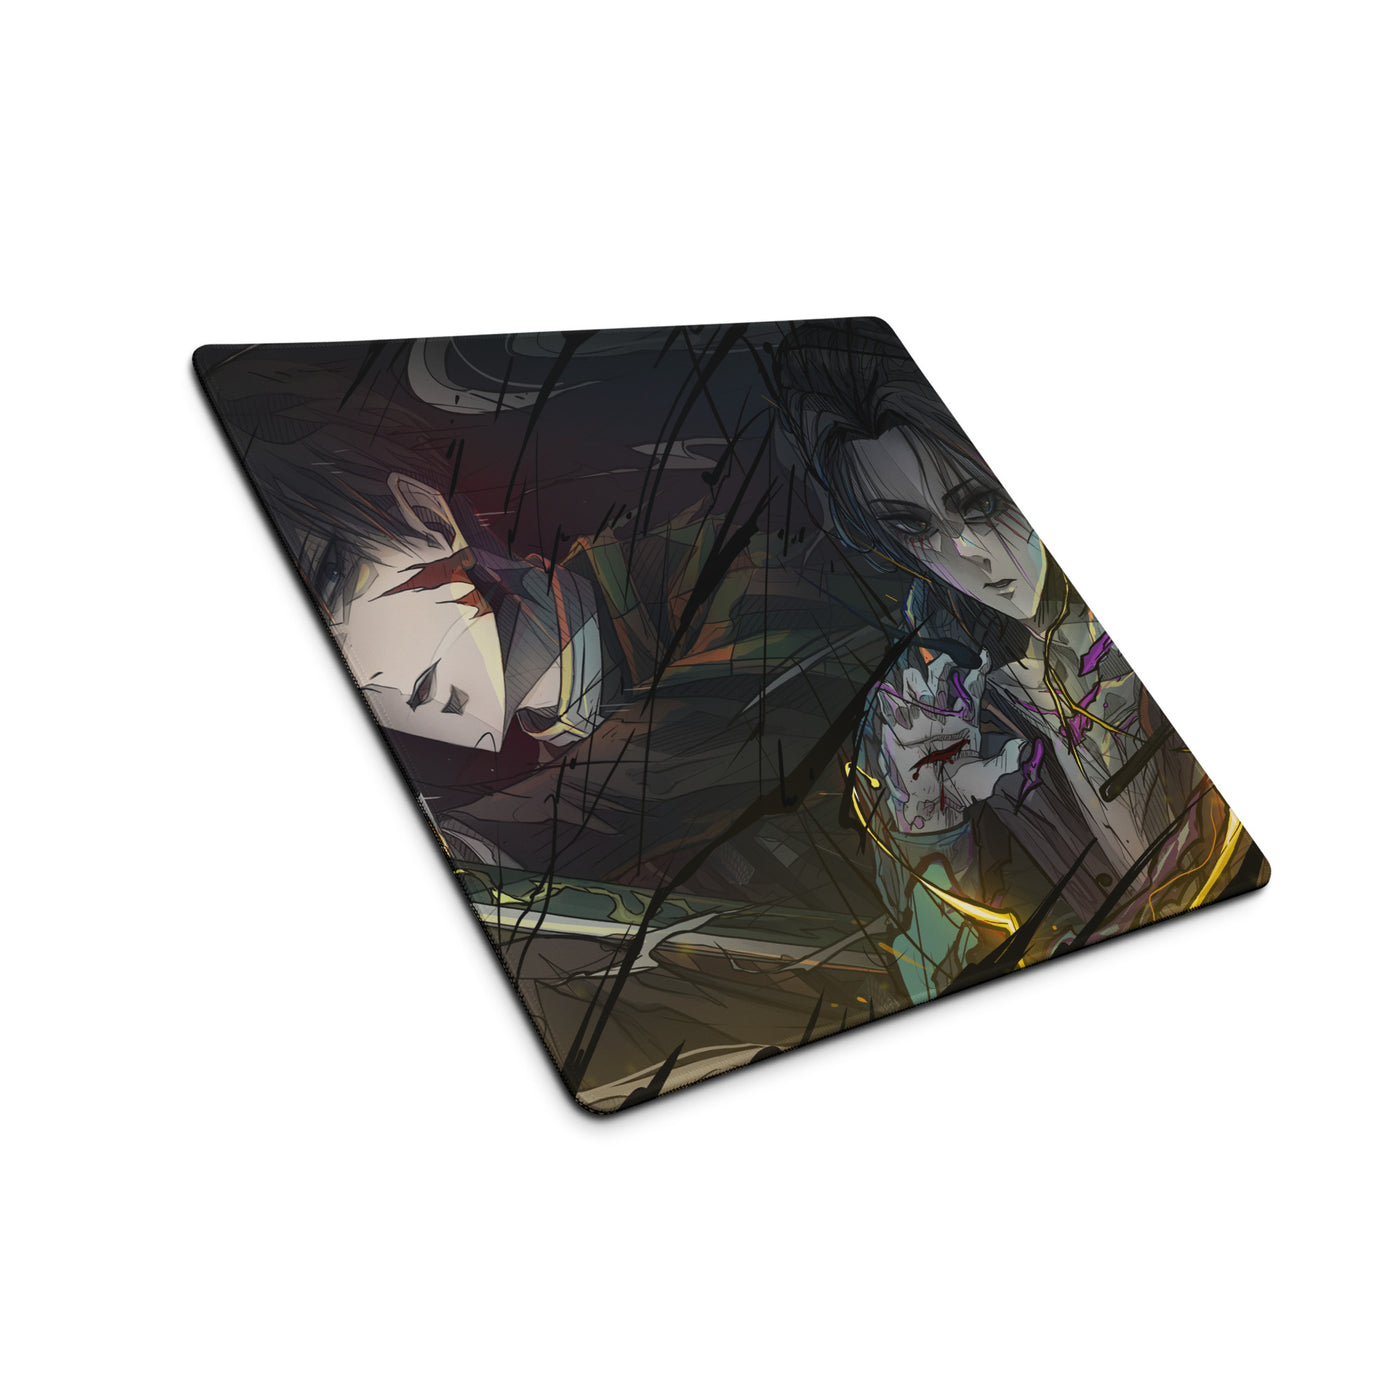 Attack on Titan Gaming mouse pad